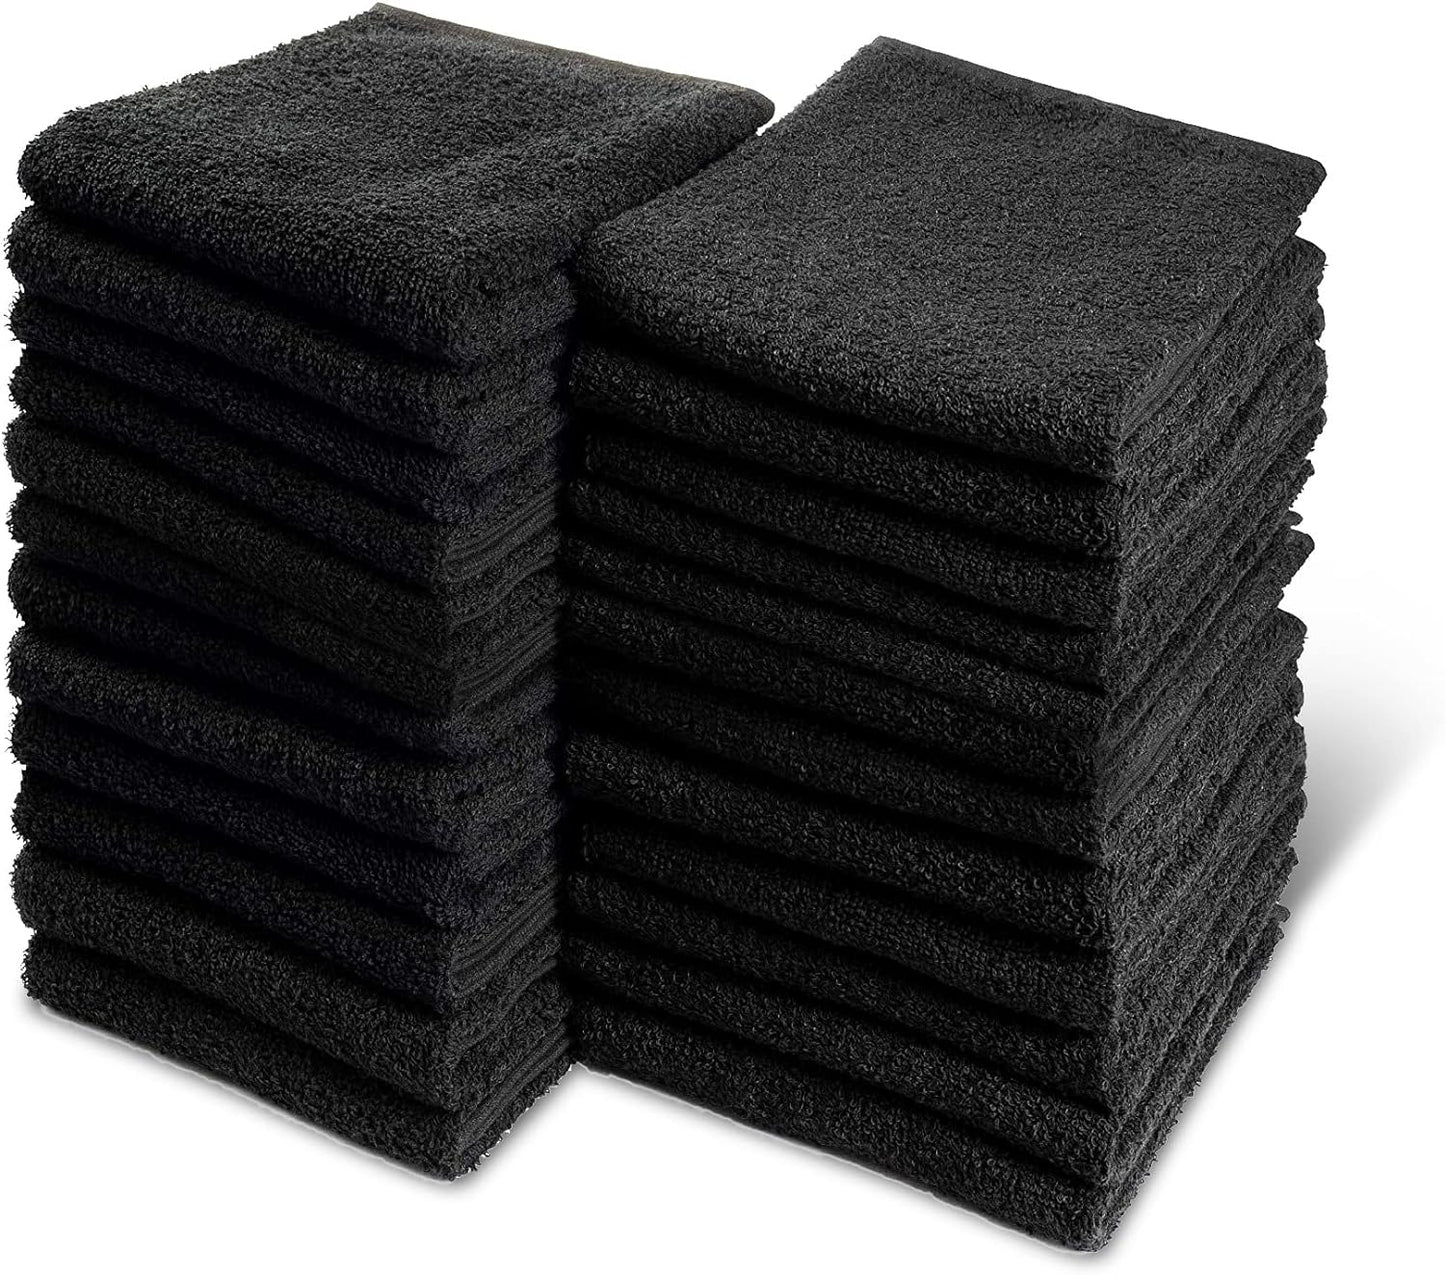 Black Bleach Proof Towels Set, 96 Pack 100% Cotton 16" X 27" Color Safe, Stain Resistant, Quick Drying Towels for Beauty, Hair and Nail Salon, Gym, Spa and Home Hair Care - Design By Technique